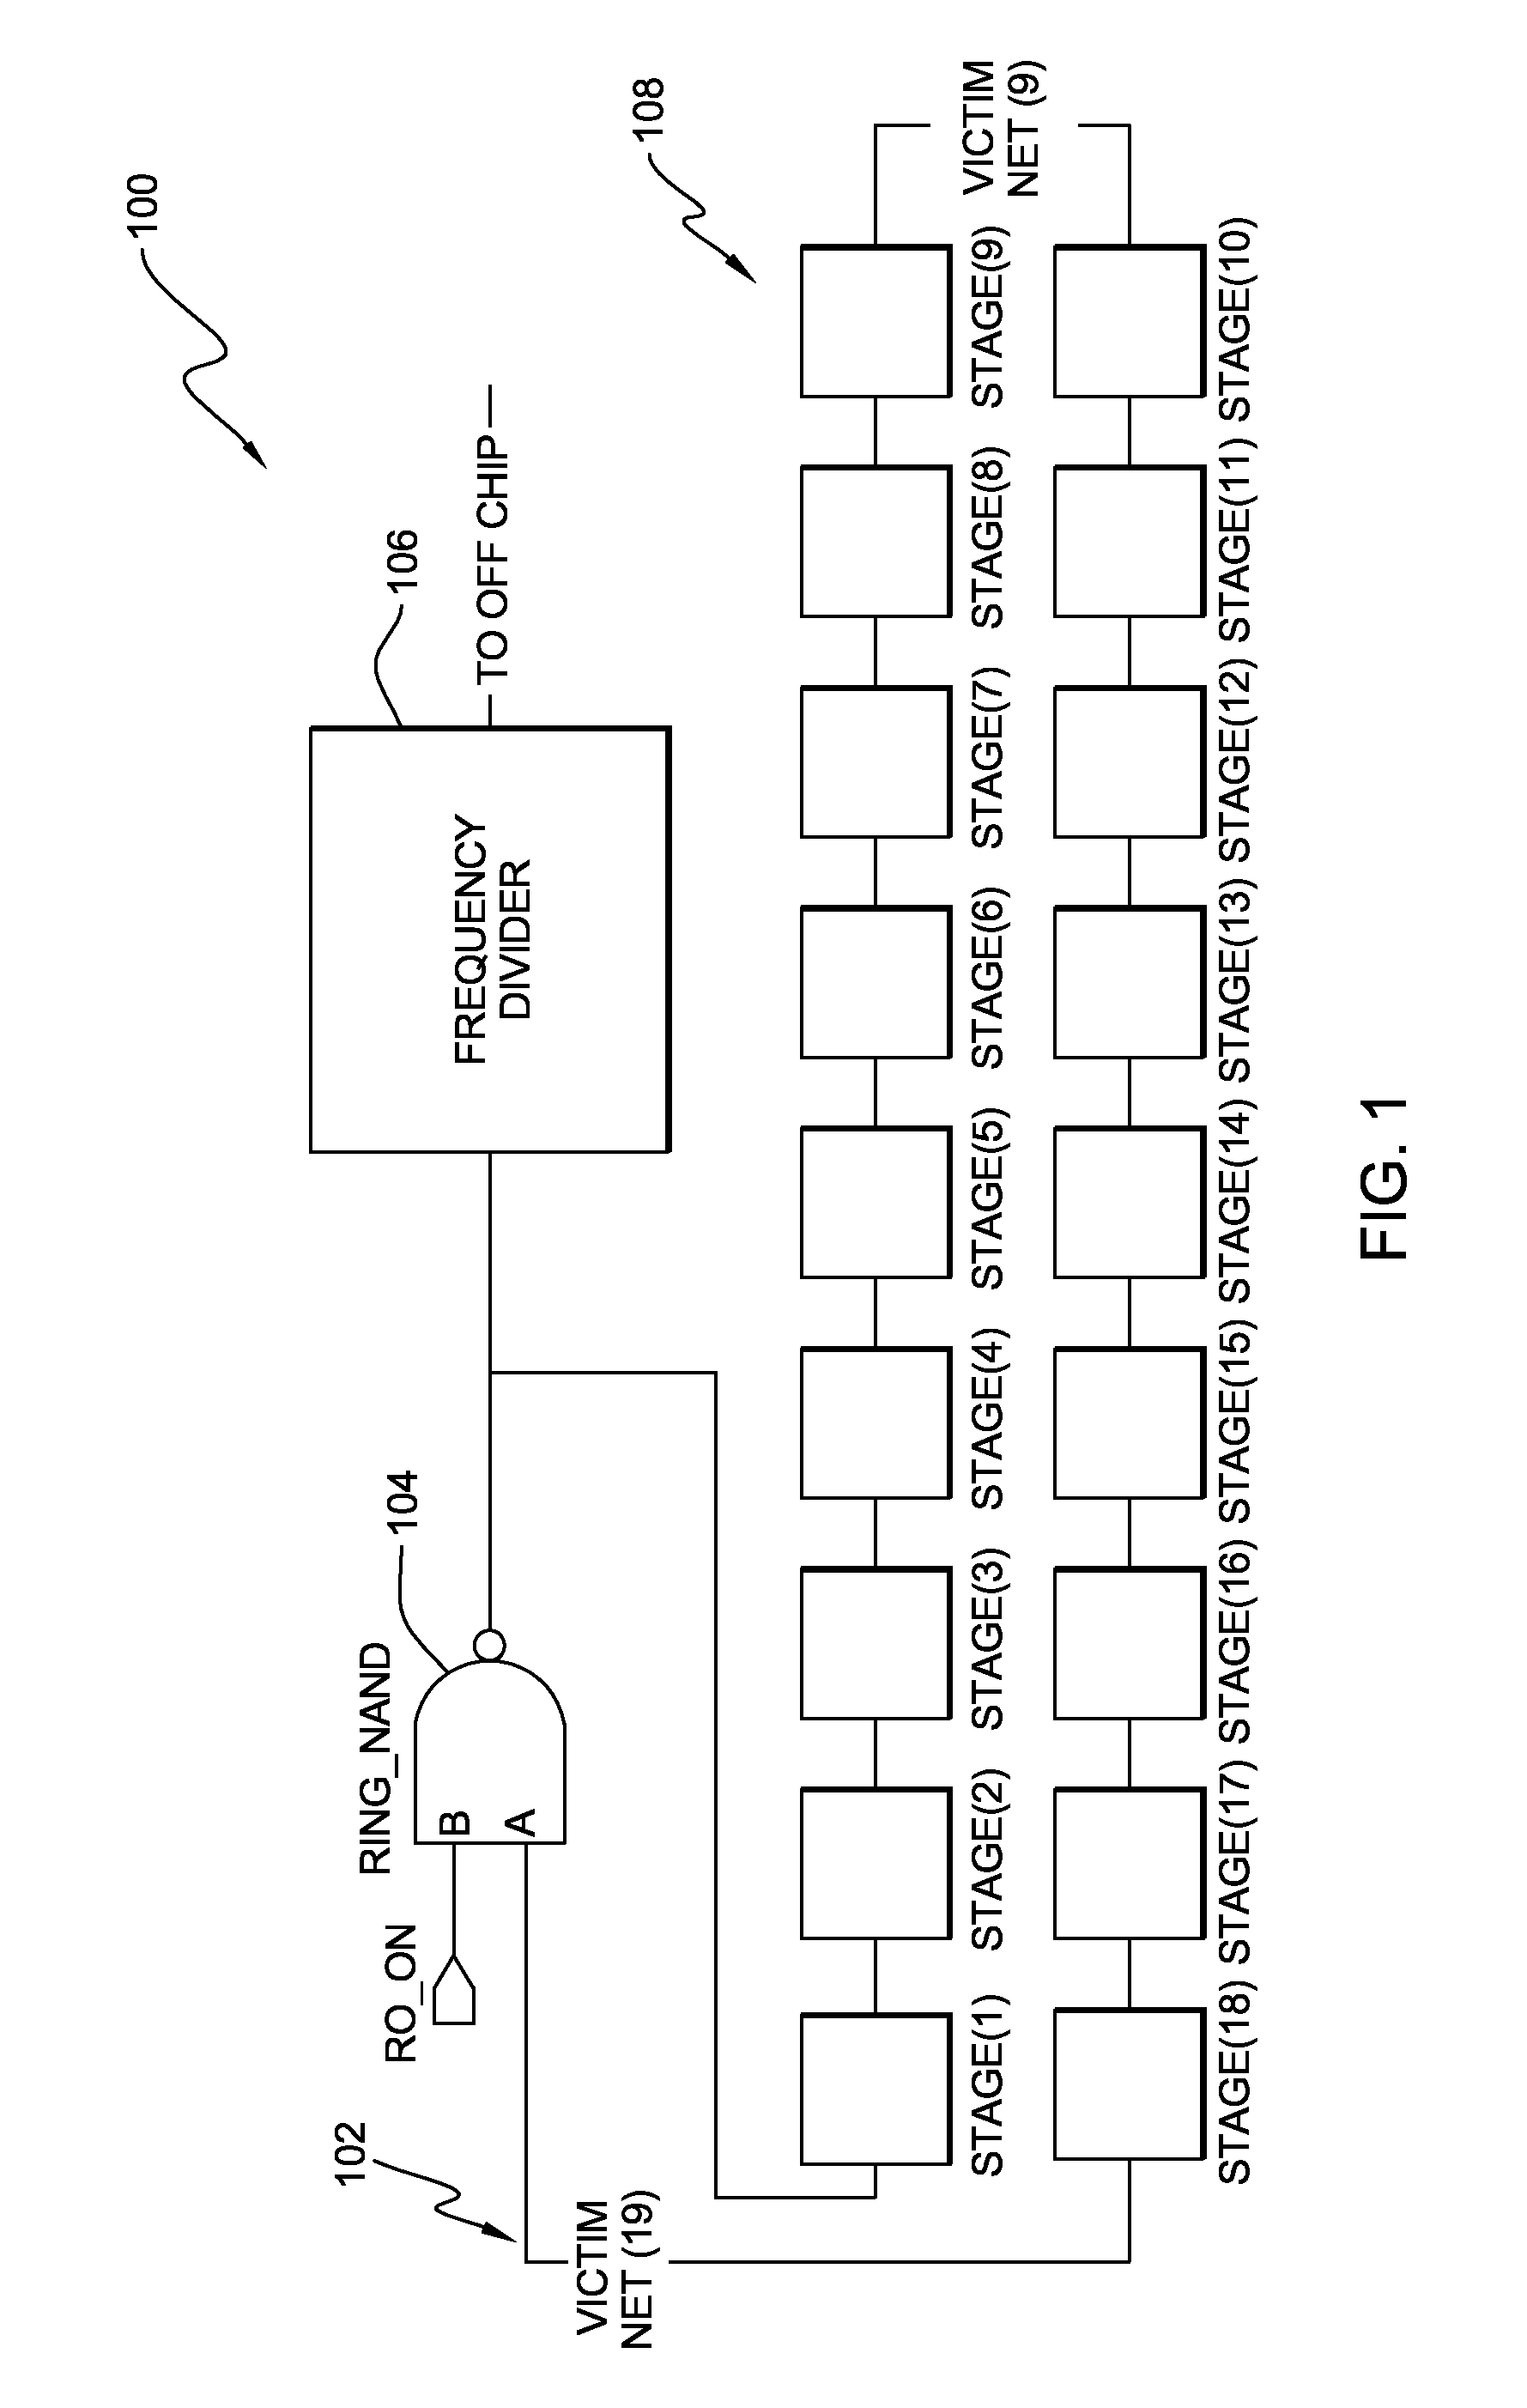 Structure for Couple Noise Characterization Using a Single Oscillator